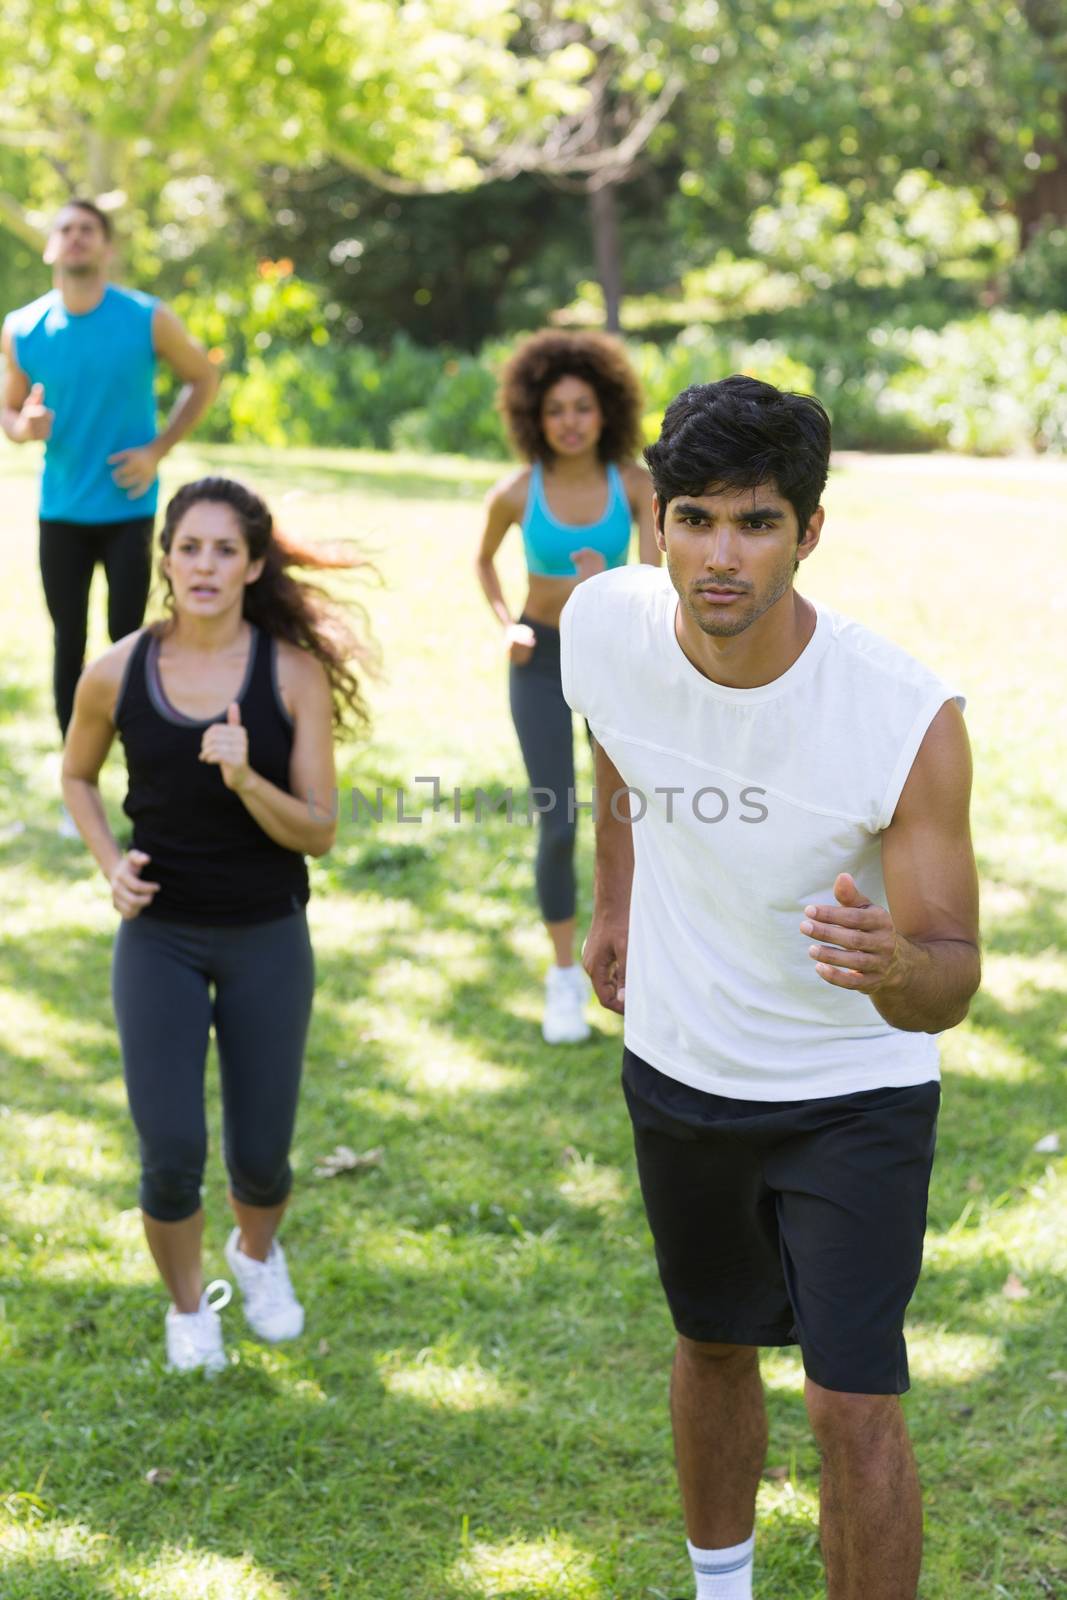 Group of athletes jogging on grassy land in park